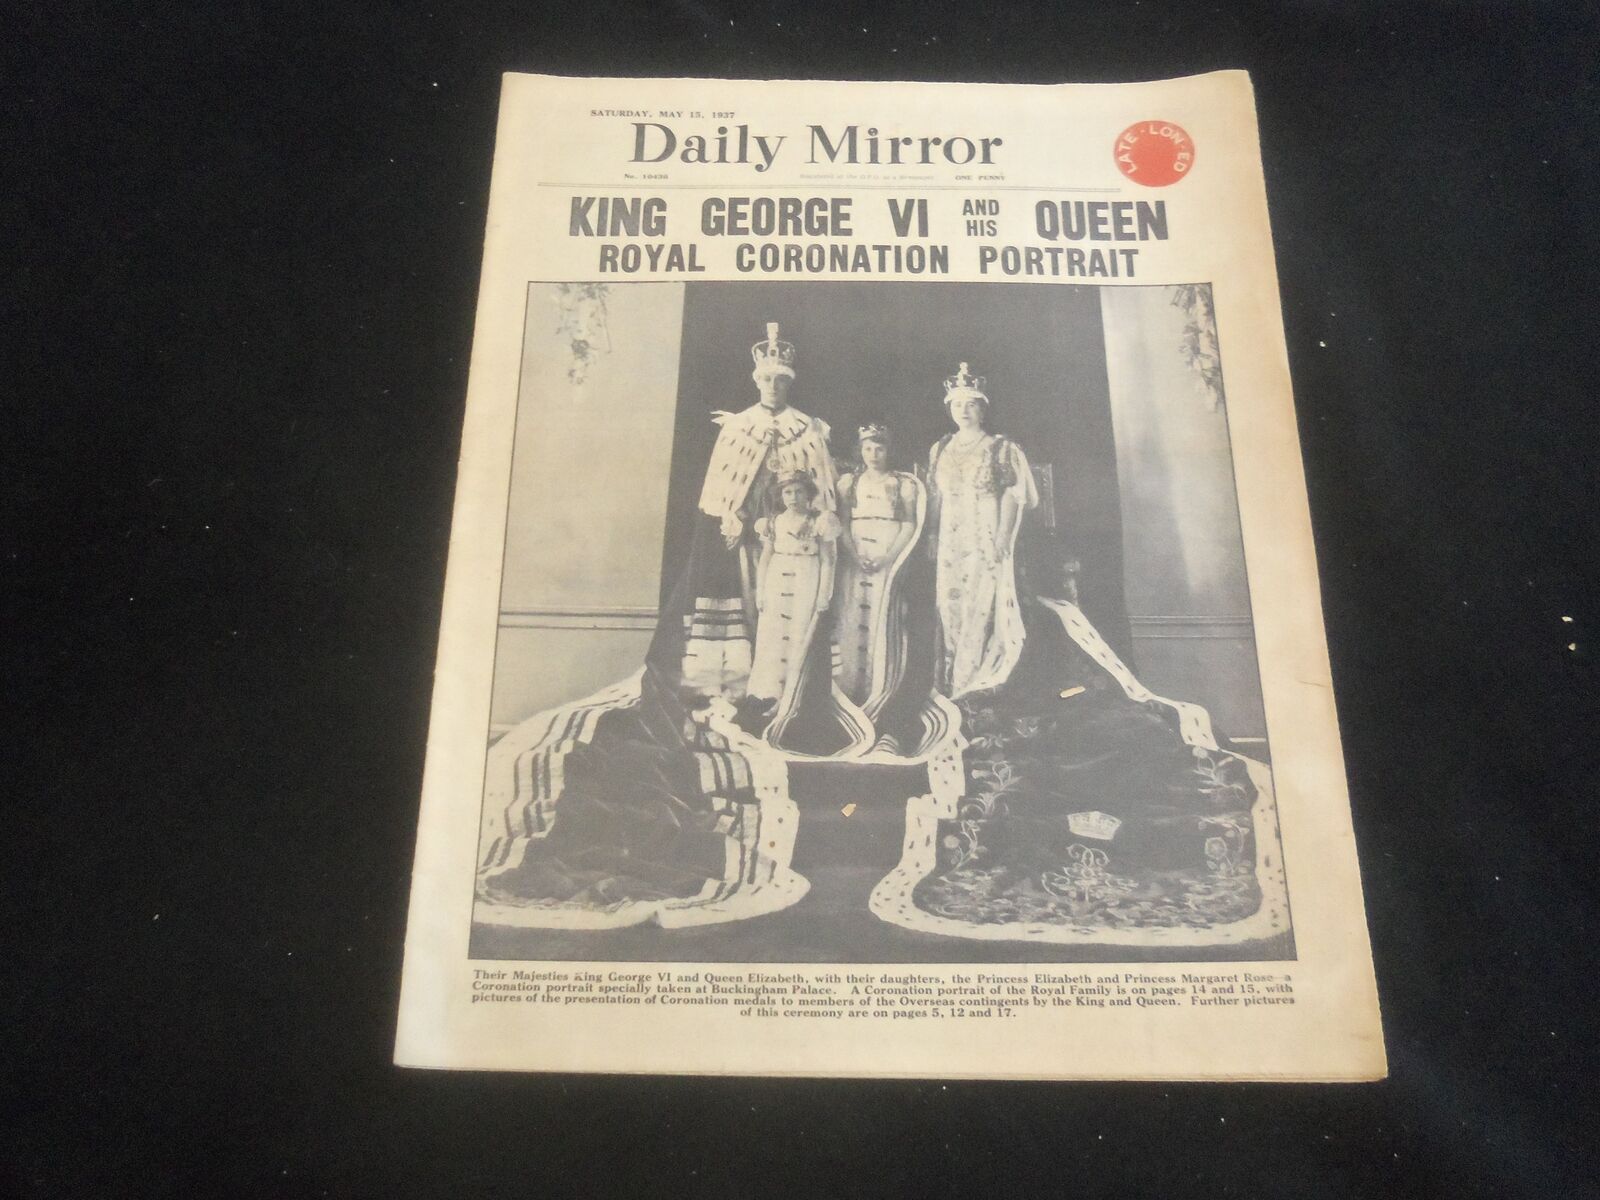 1937 MAY 15 DAILY MIRROR NEWSPAPER - LONDON -KING GEORGE VI & HIS QUEEN- NP 5753